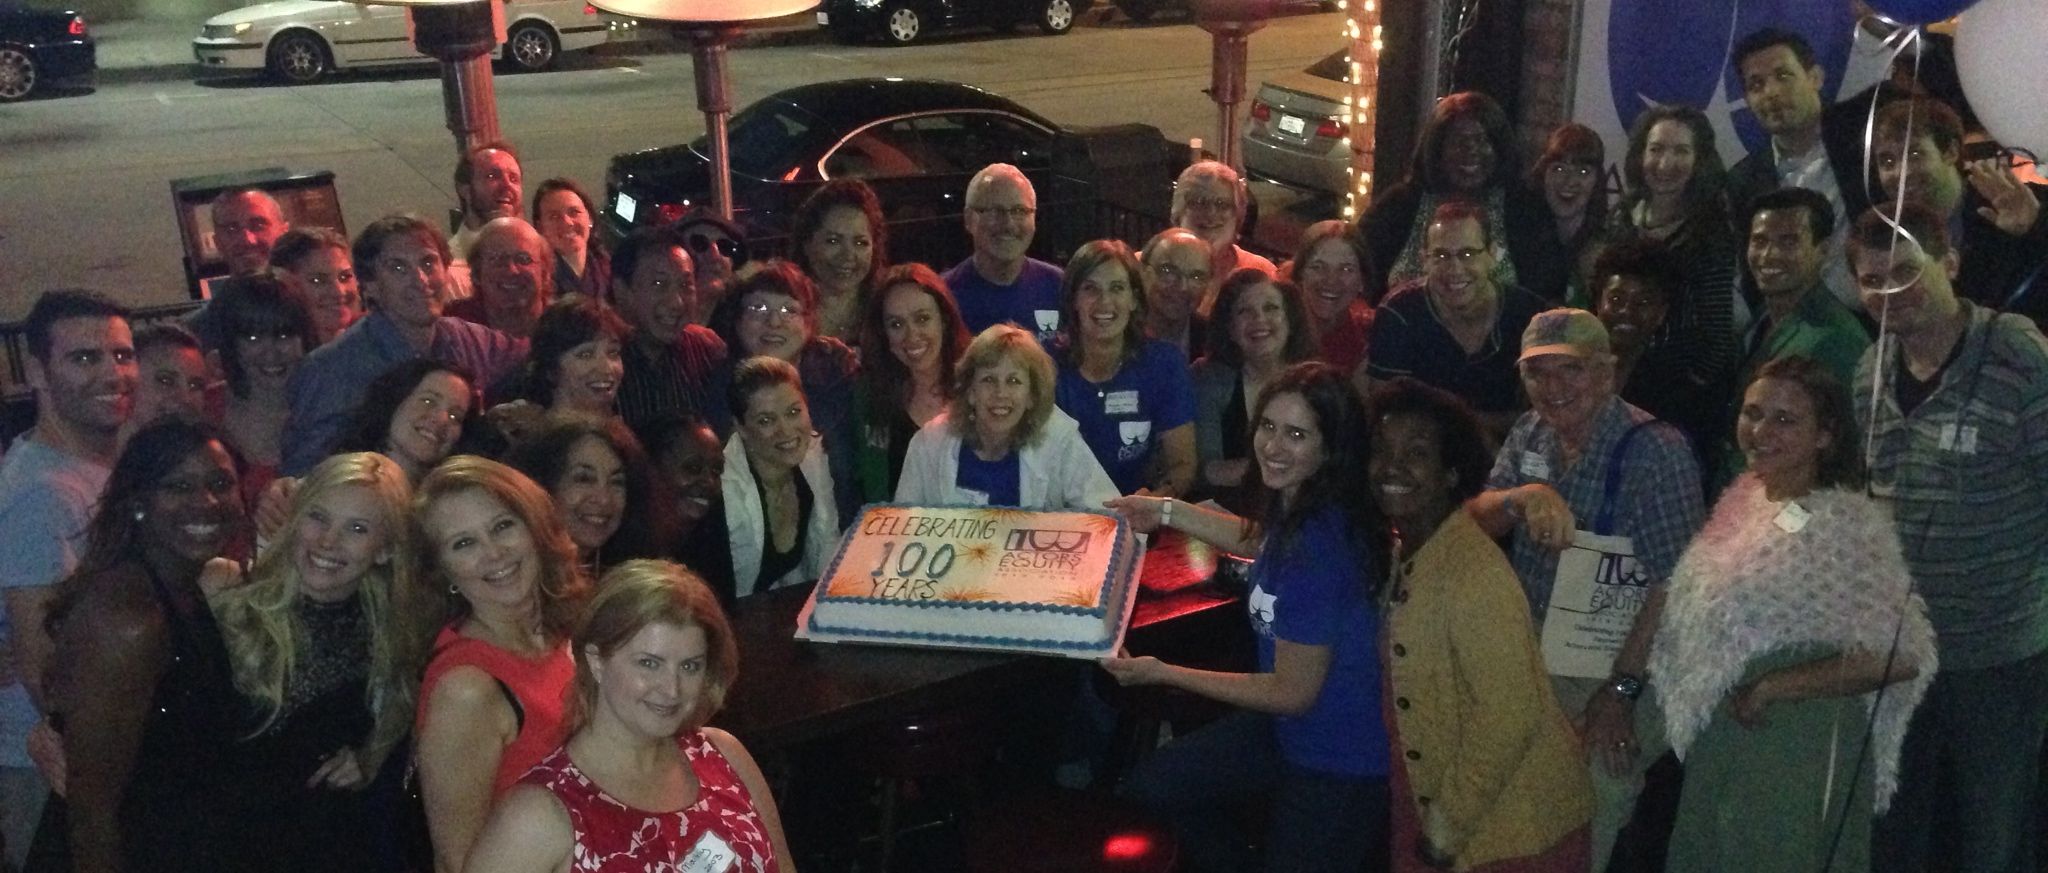 big group celebrating Equity's 100th anniversary